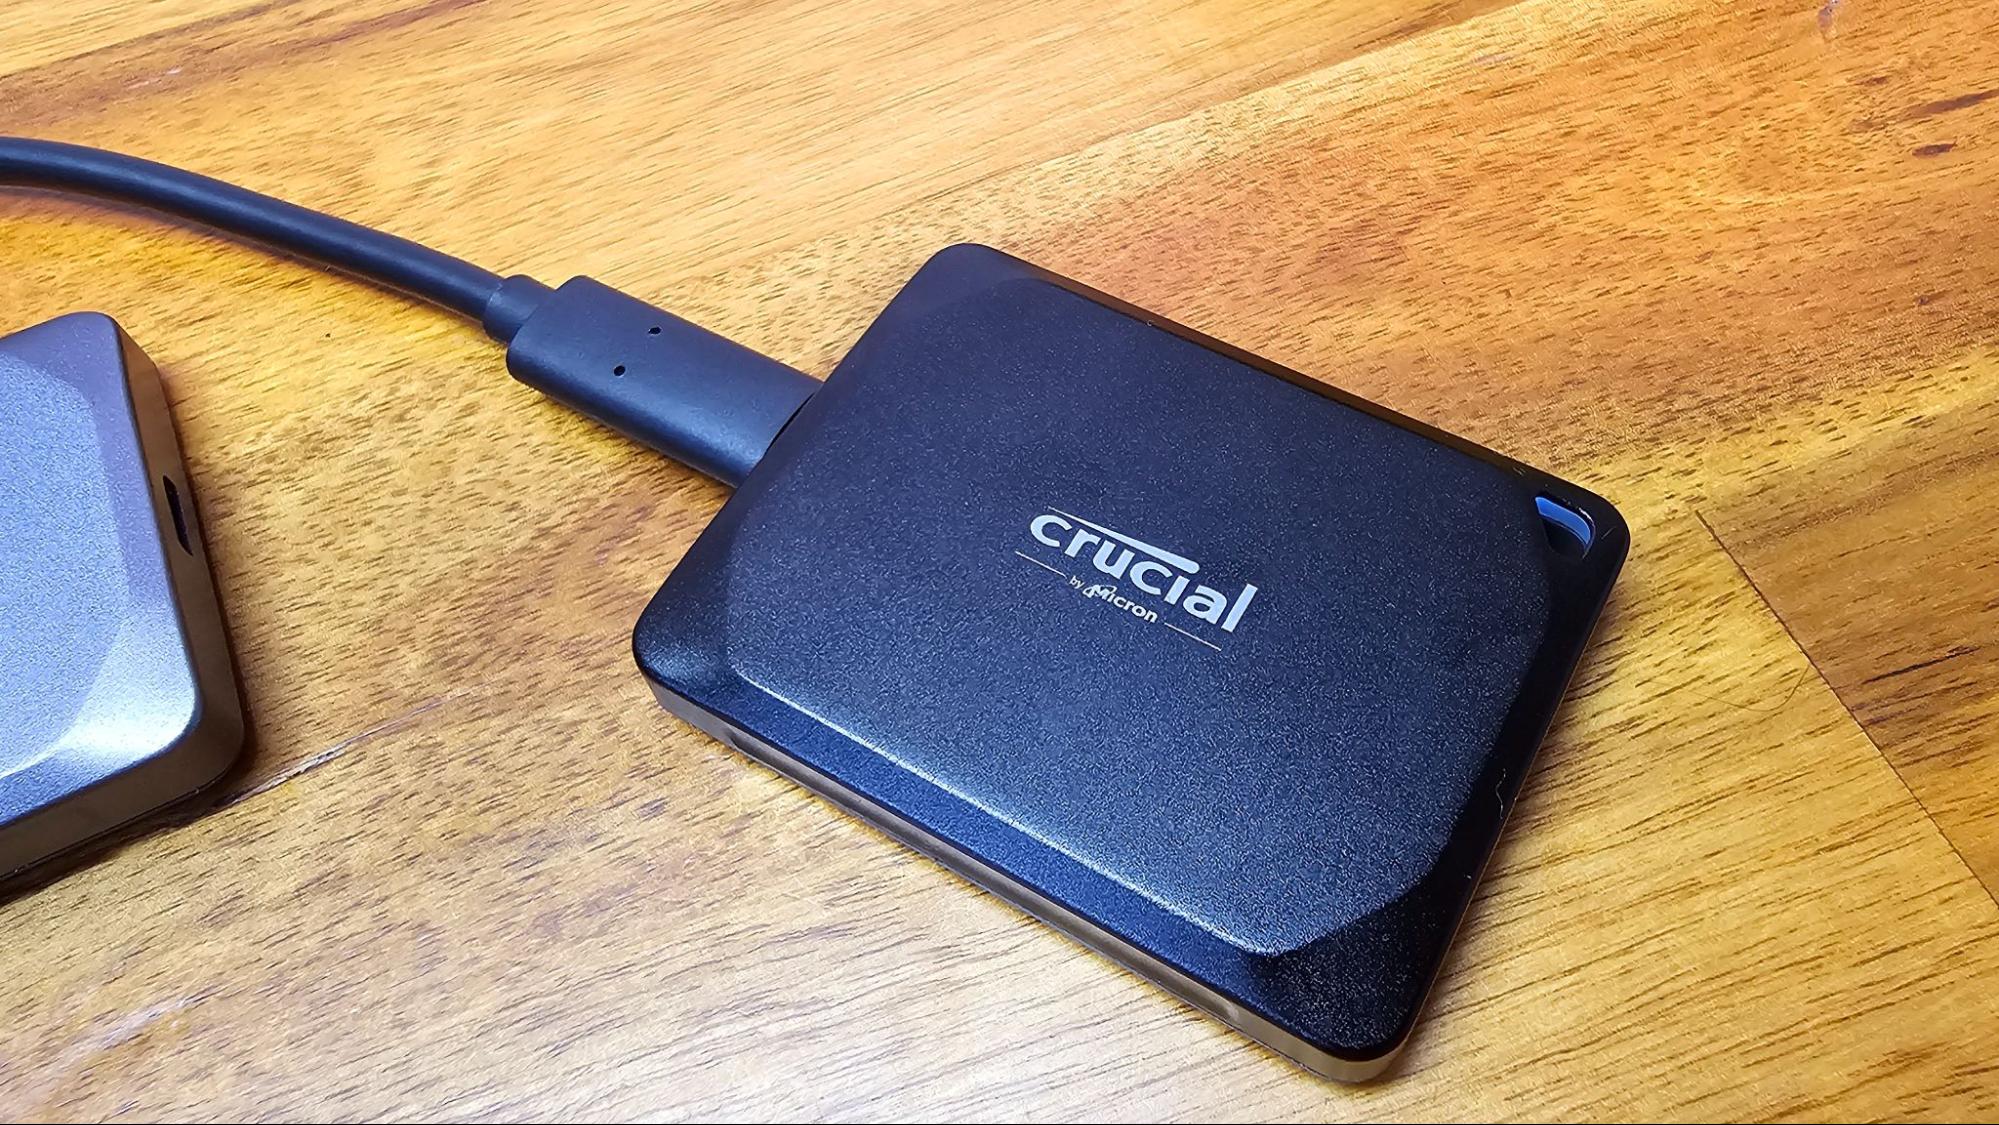 Crucial X10 Pro 1TB Portable SSD Solid S CT1000X10PROSSD9 Tech-America